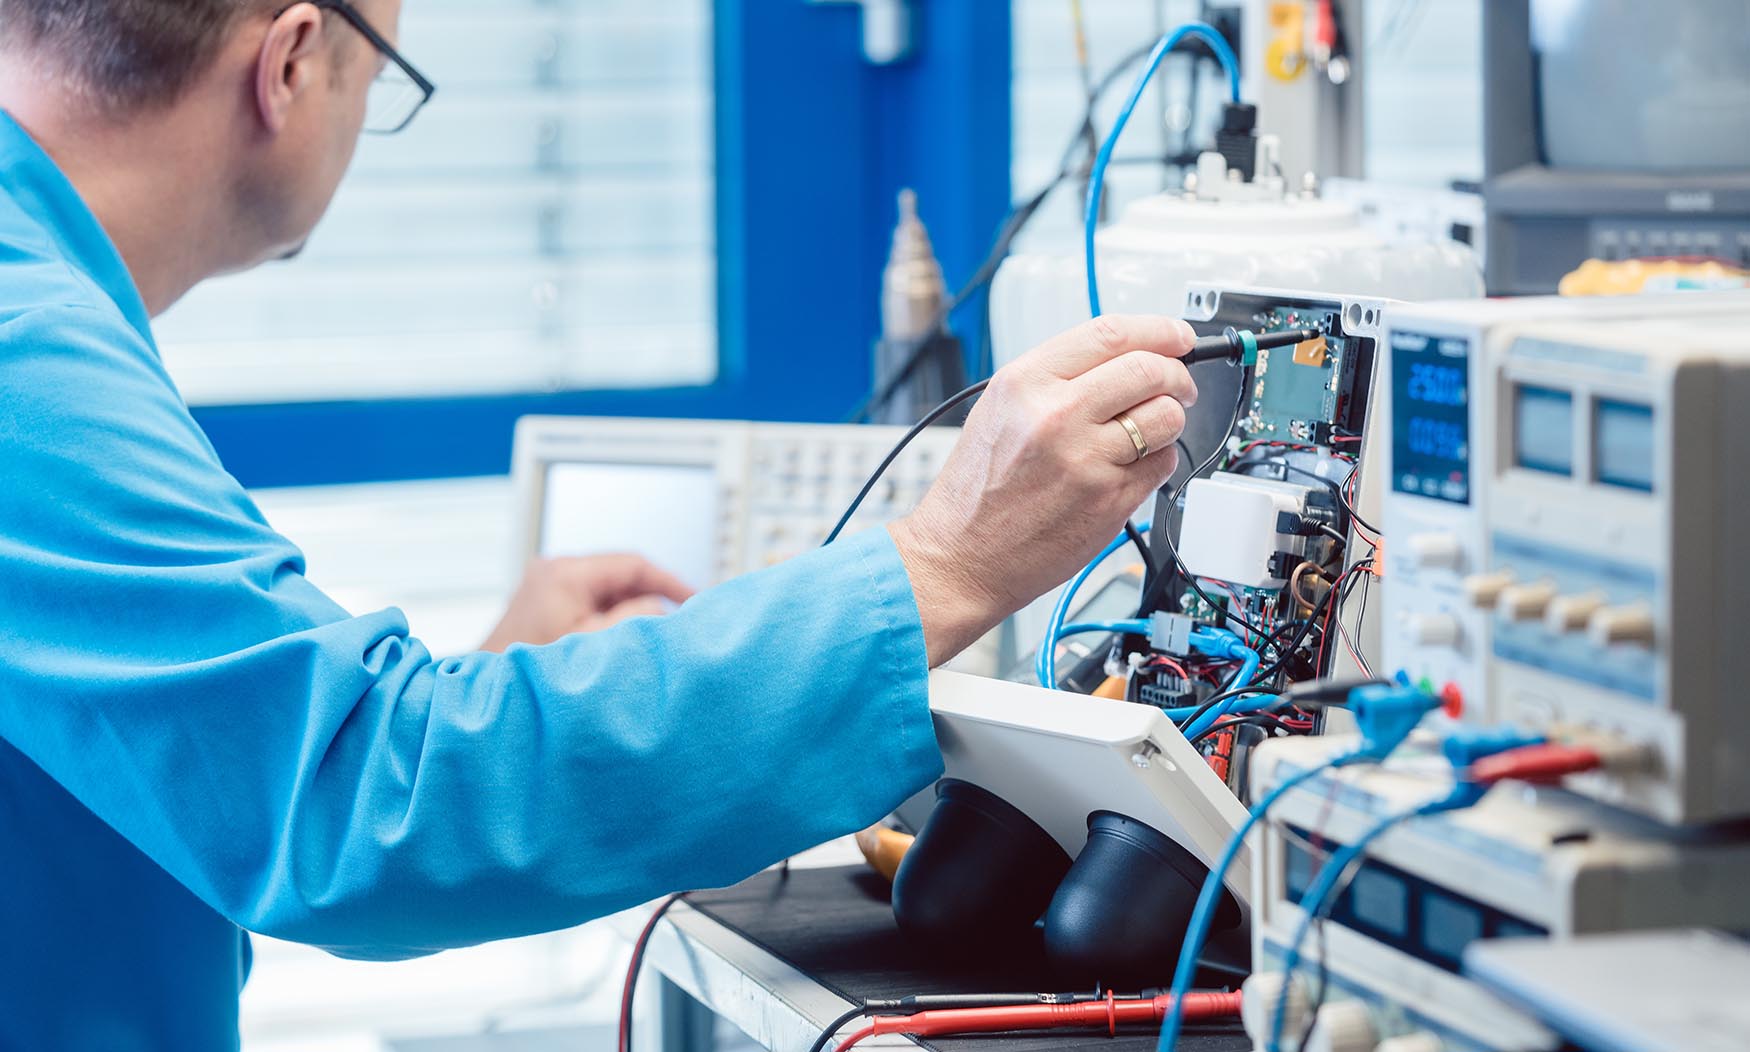 Electronics engineer troubleshooting defects in a hardware product